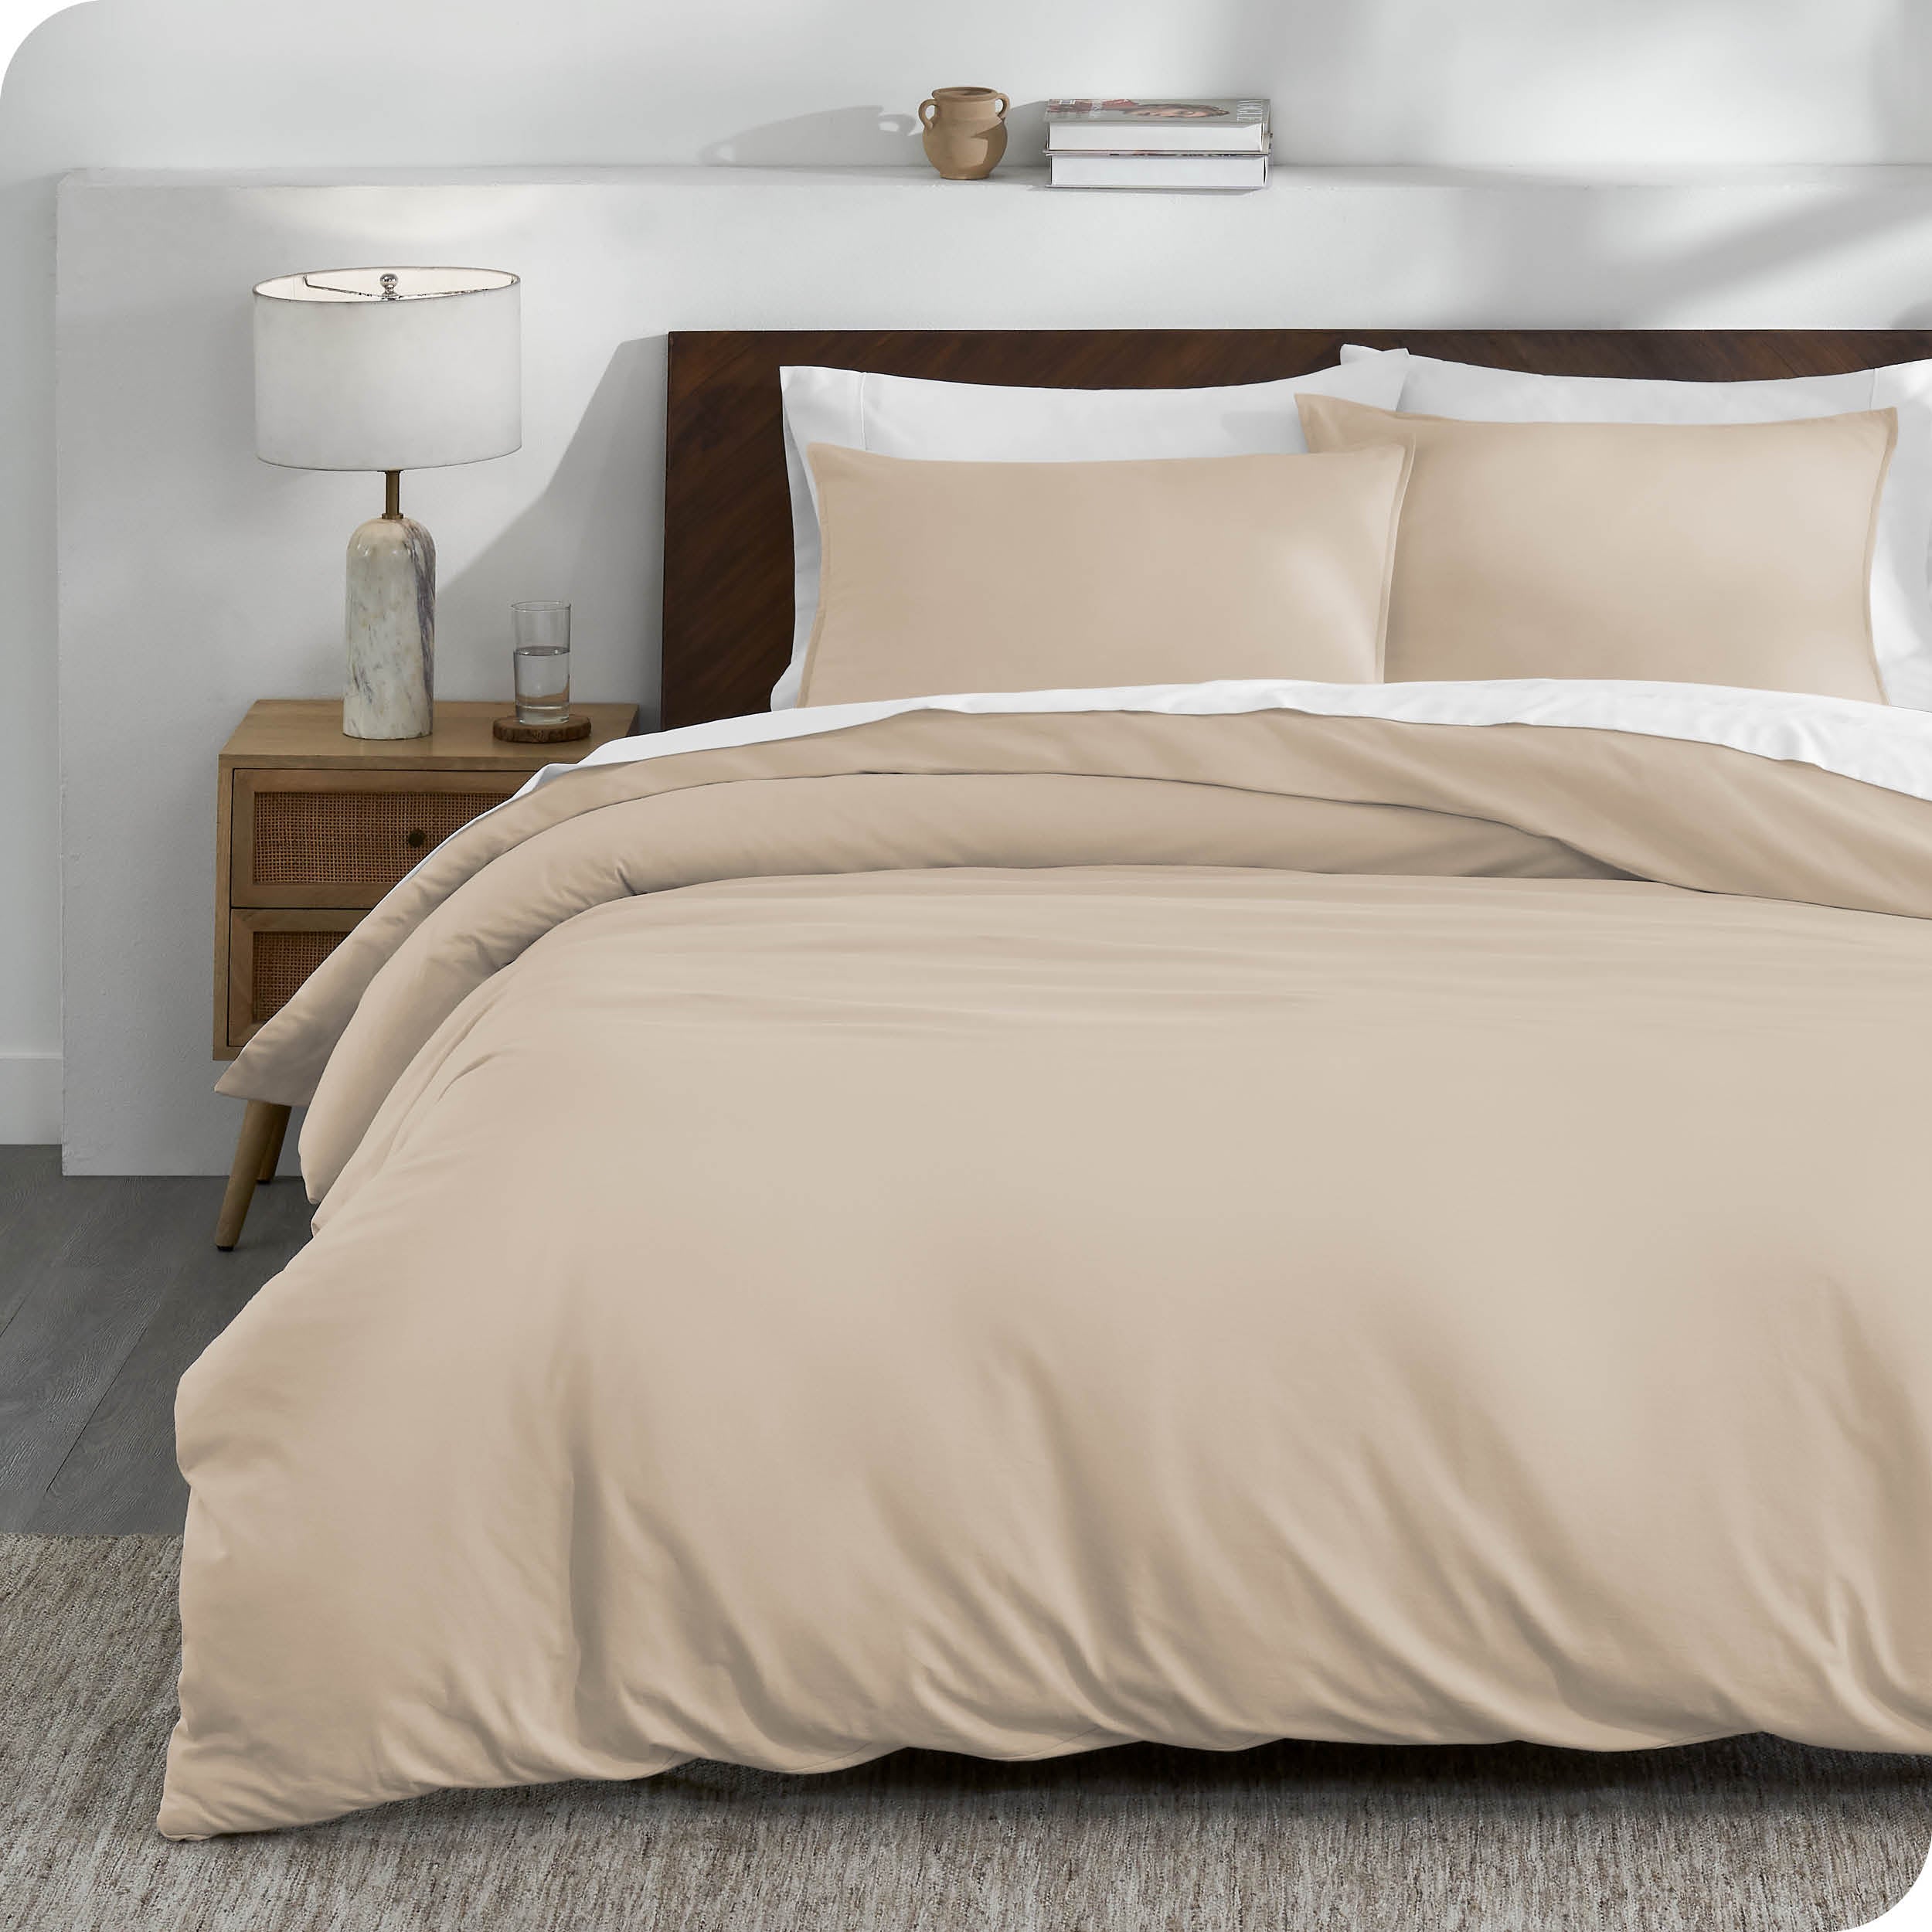 A sand organic cotton jersey duvet cover on a bed made with a white bedding